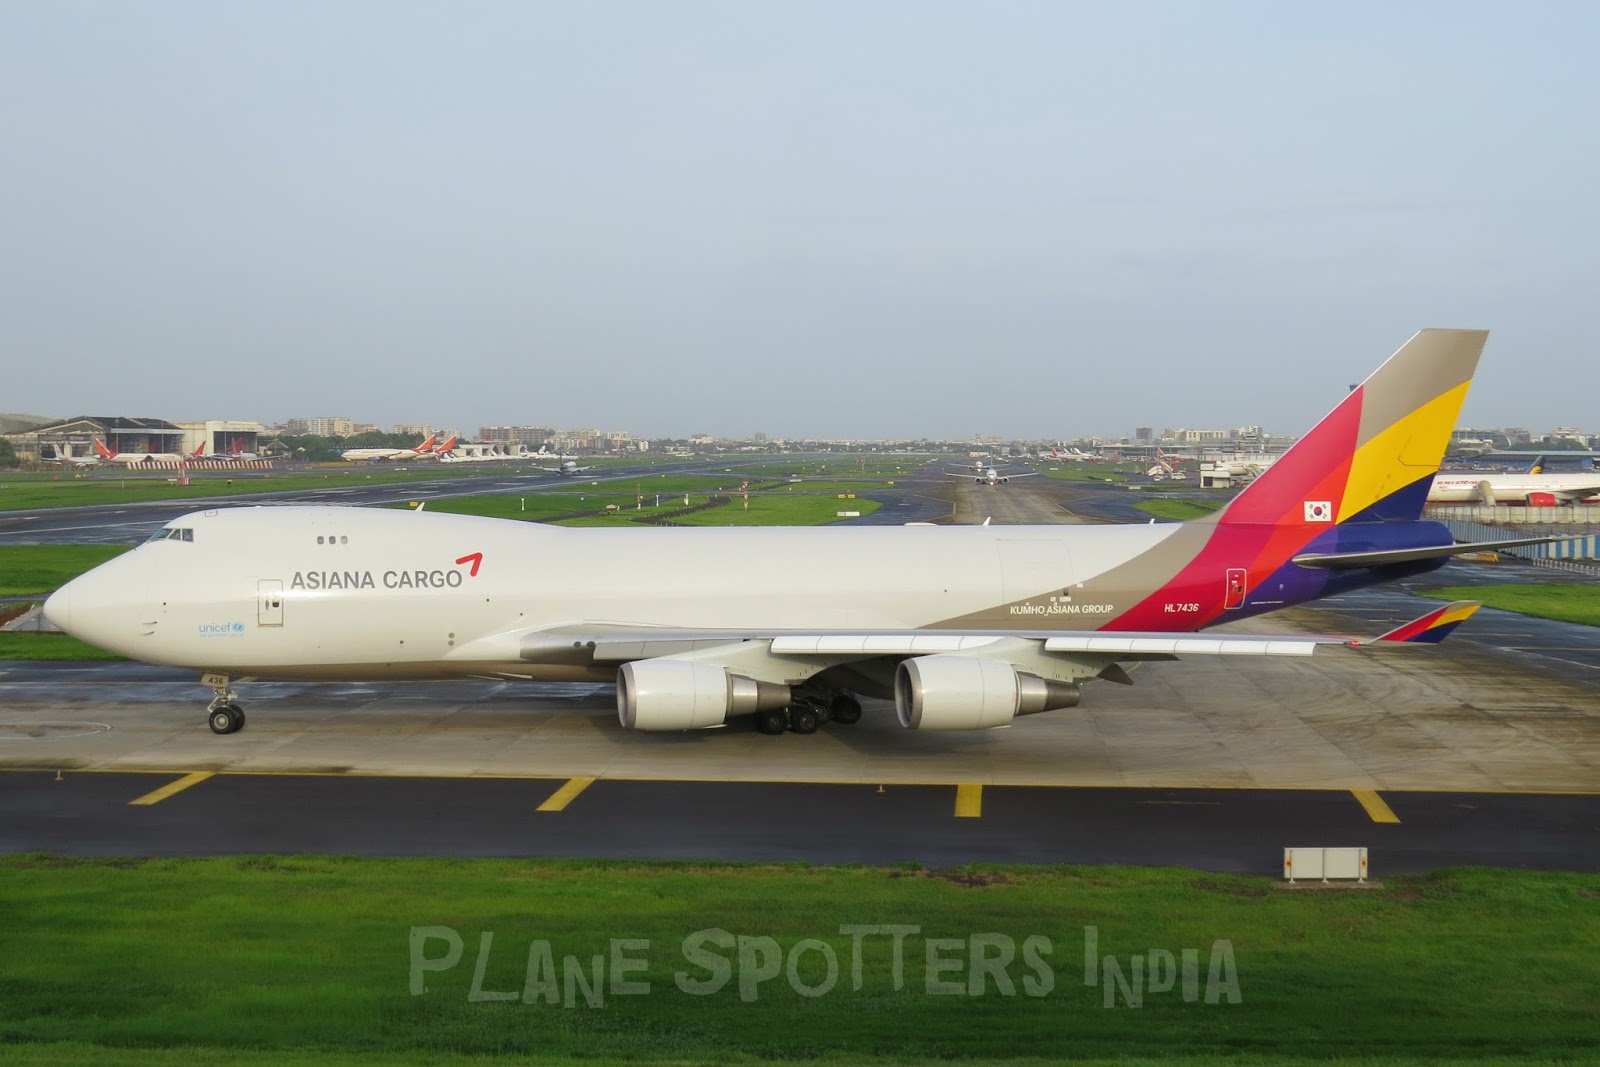 Asiana Cargo Plane Spotters India www.PlaneSpotters.in